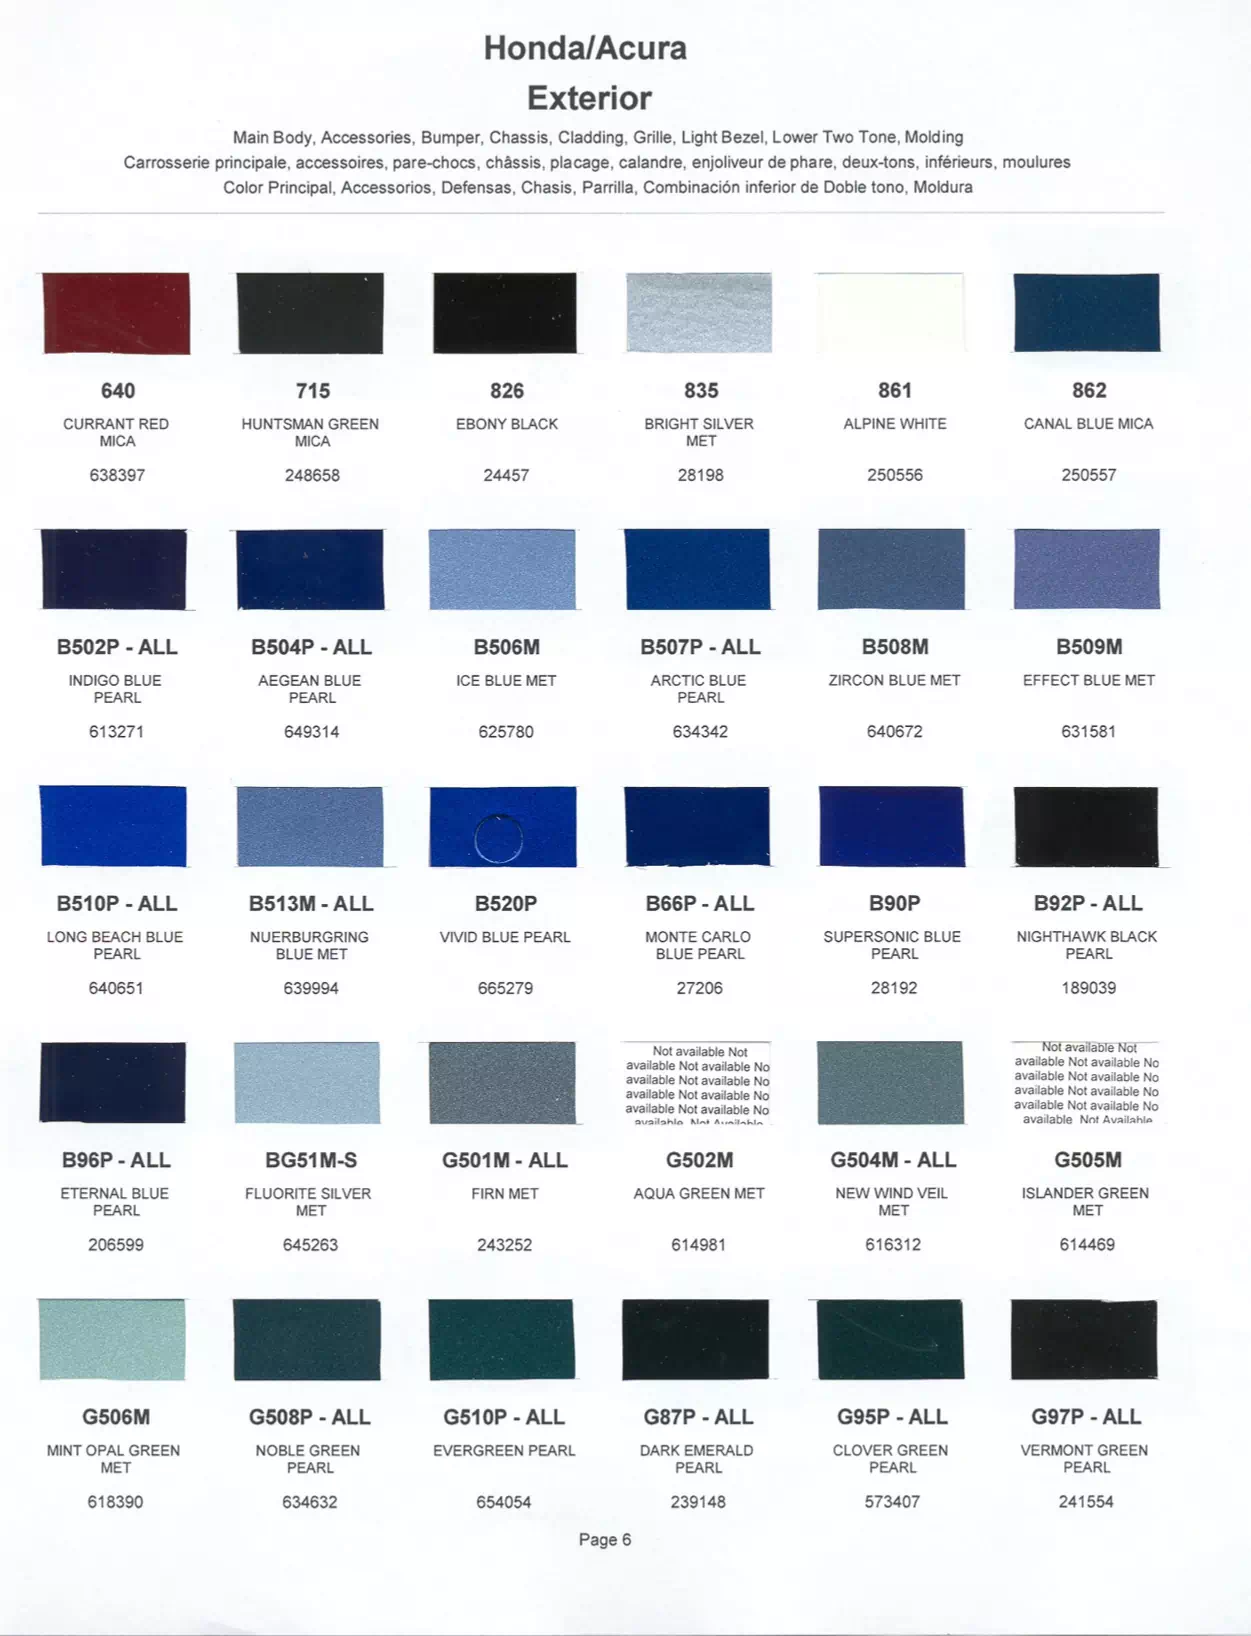 Color Swatches of Honda vehicles.